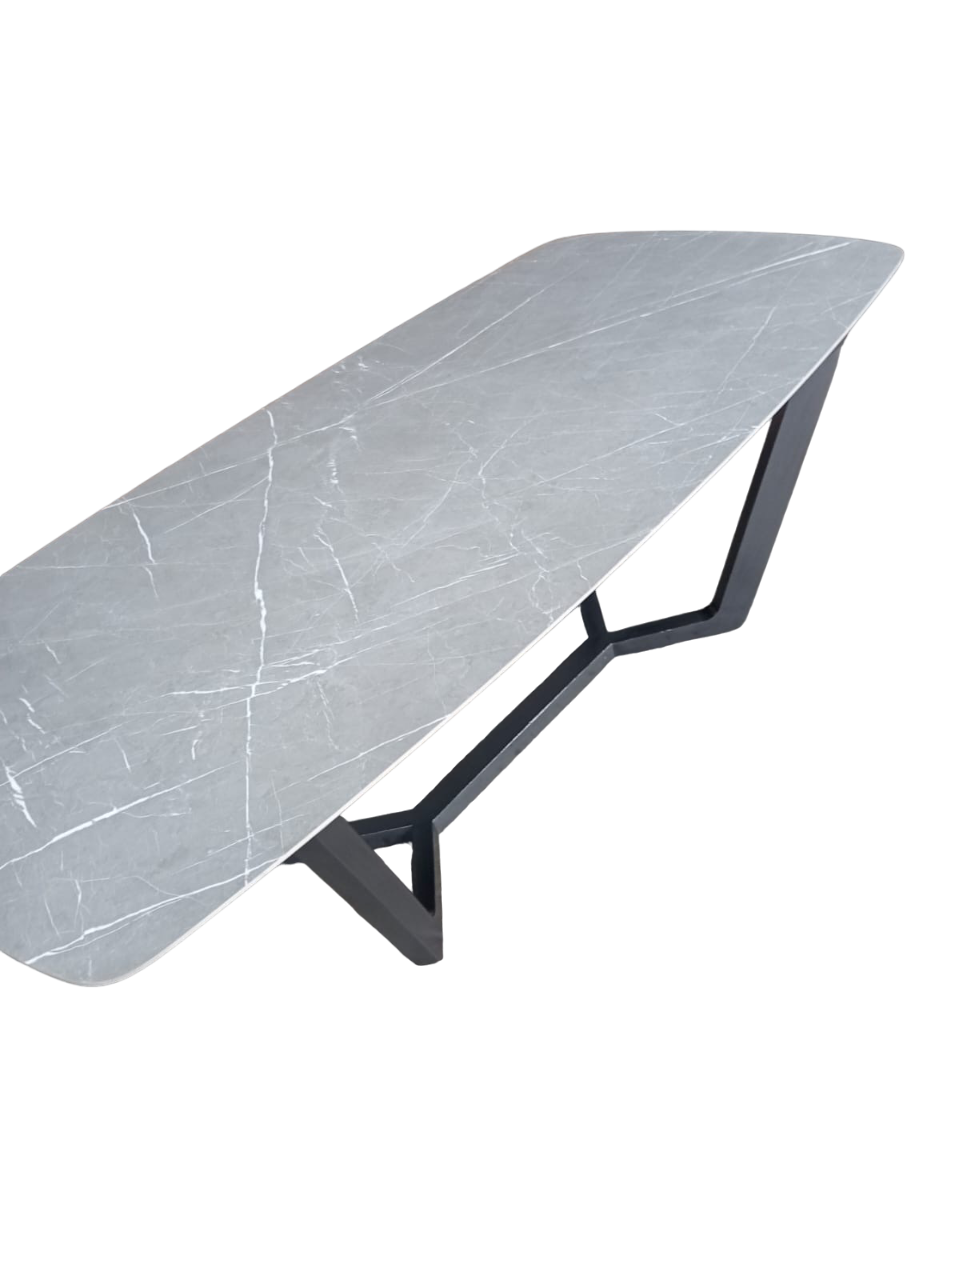 Stone top dining table customisable in stone colour in quartz or marble or porcelain.